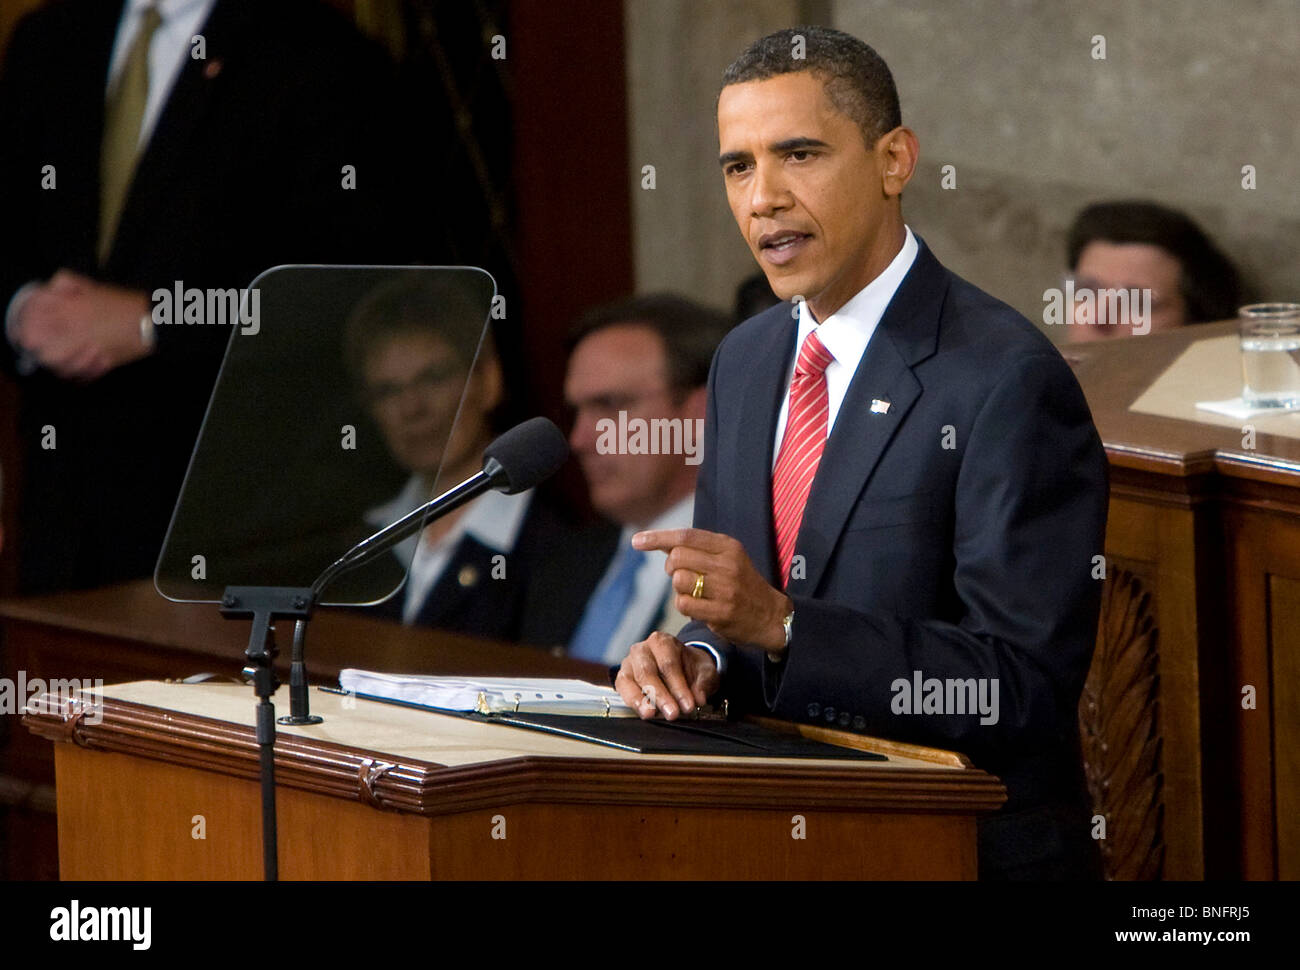 President Barack Obama addresses a joint session of Congress on Healthcare reform.  Stock Photo